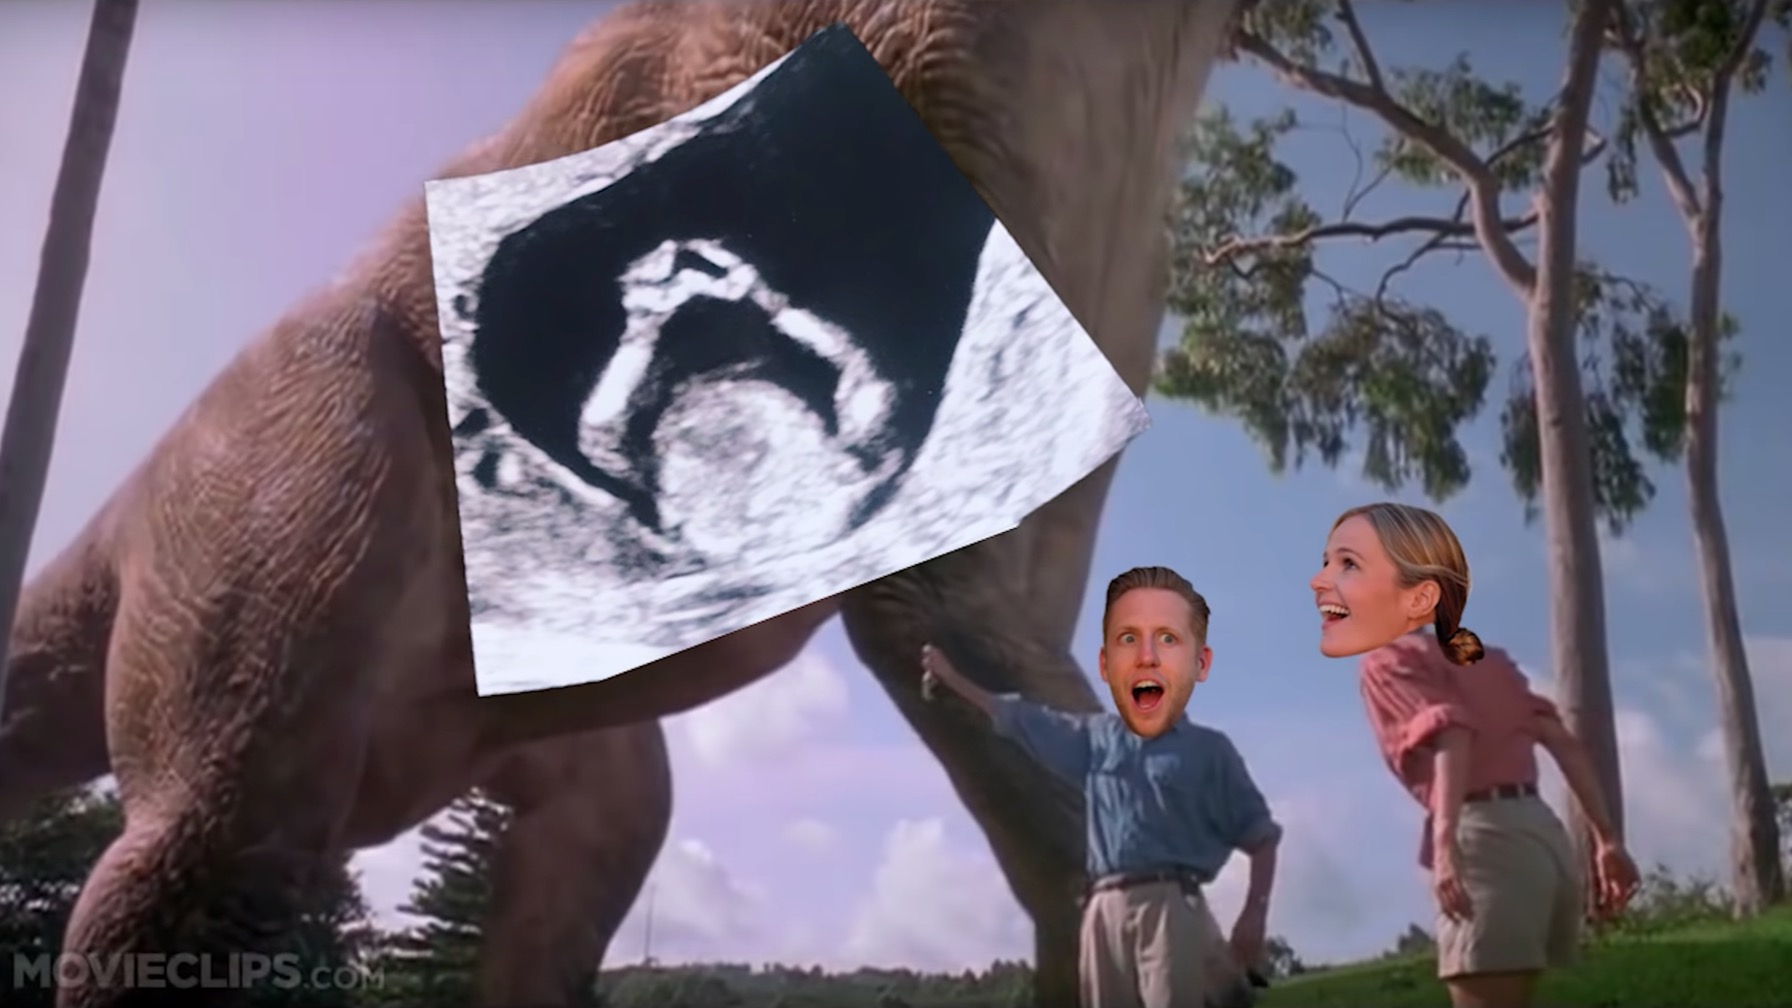 Life Finds a Way in This Jurassic Park Pregnancy Announcement [WATCH]